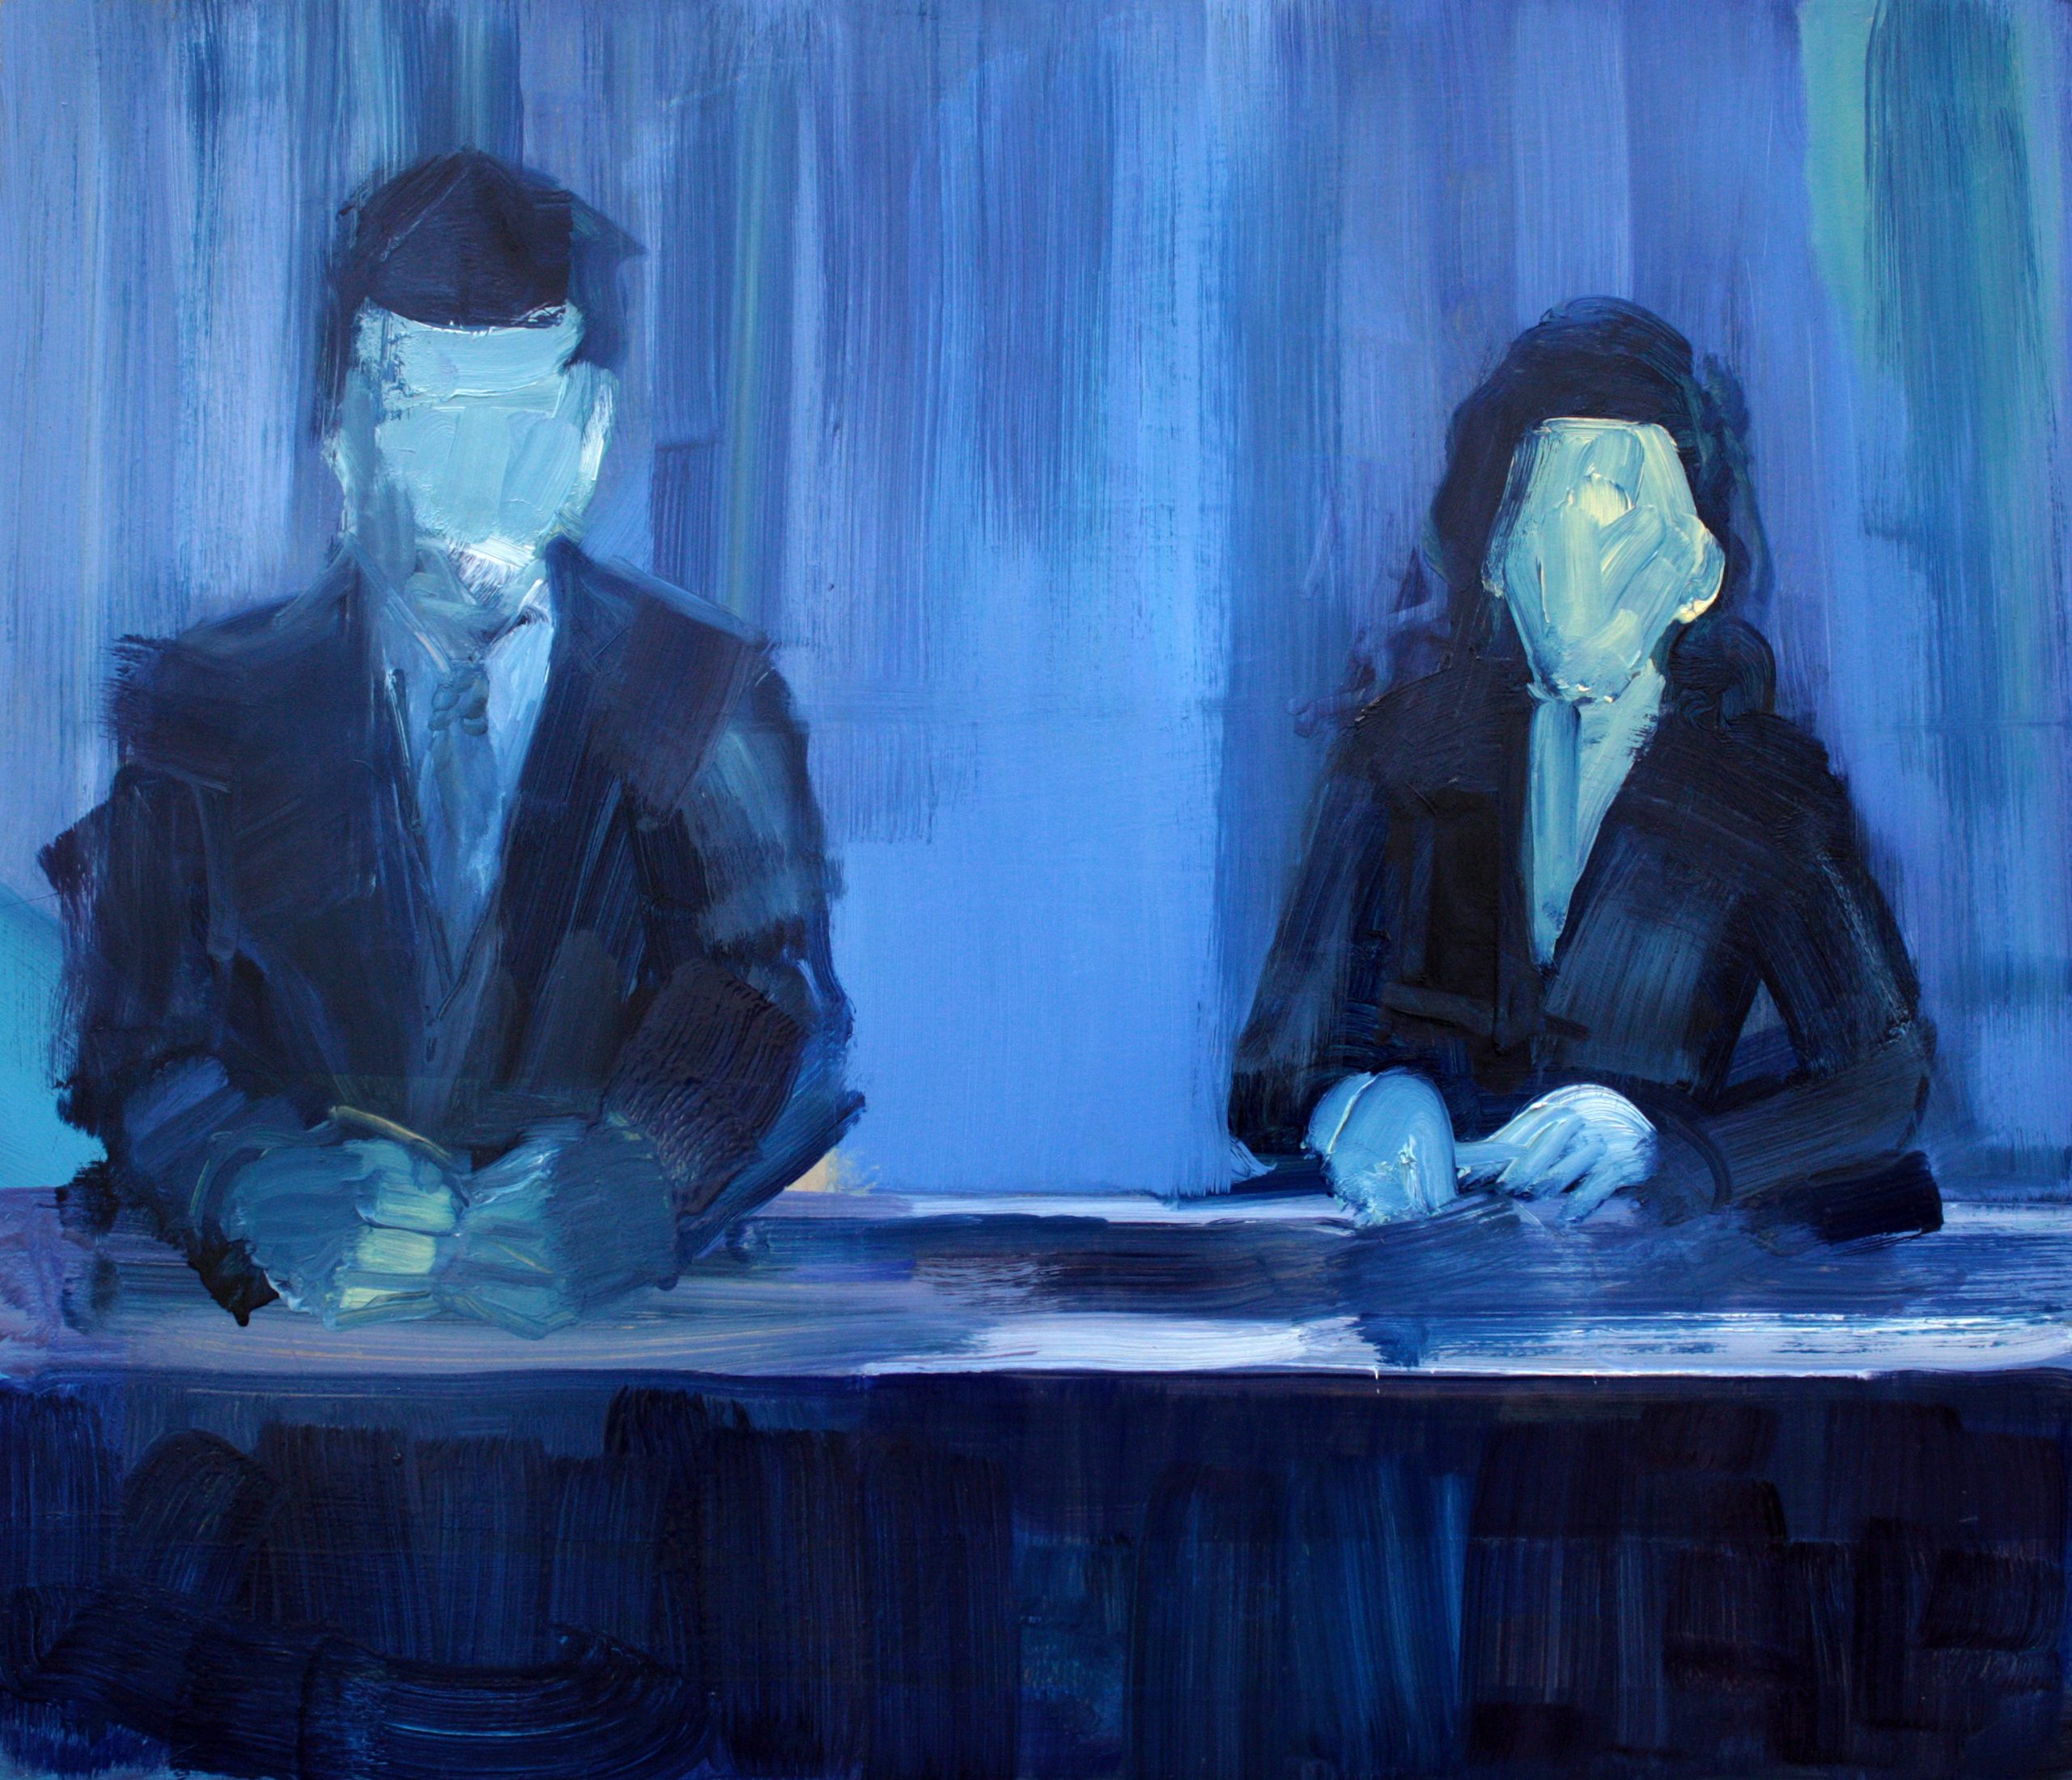 Art by Bartosz Beda, Fact at 7pm, paintings 2011